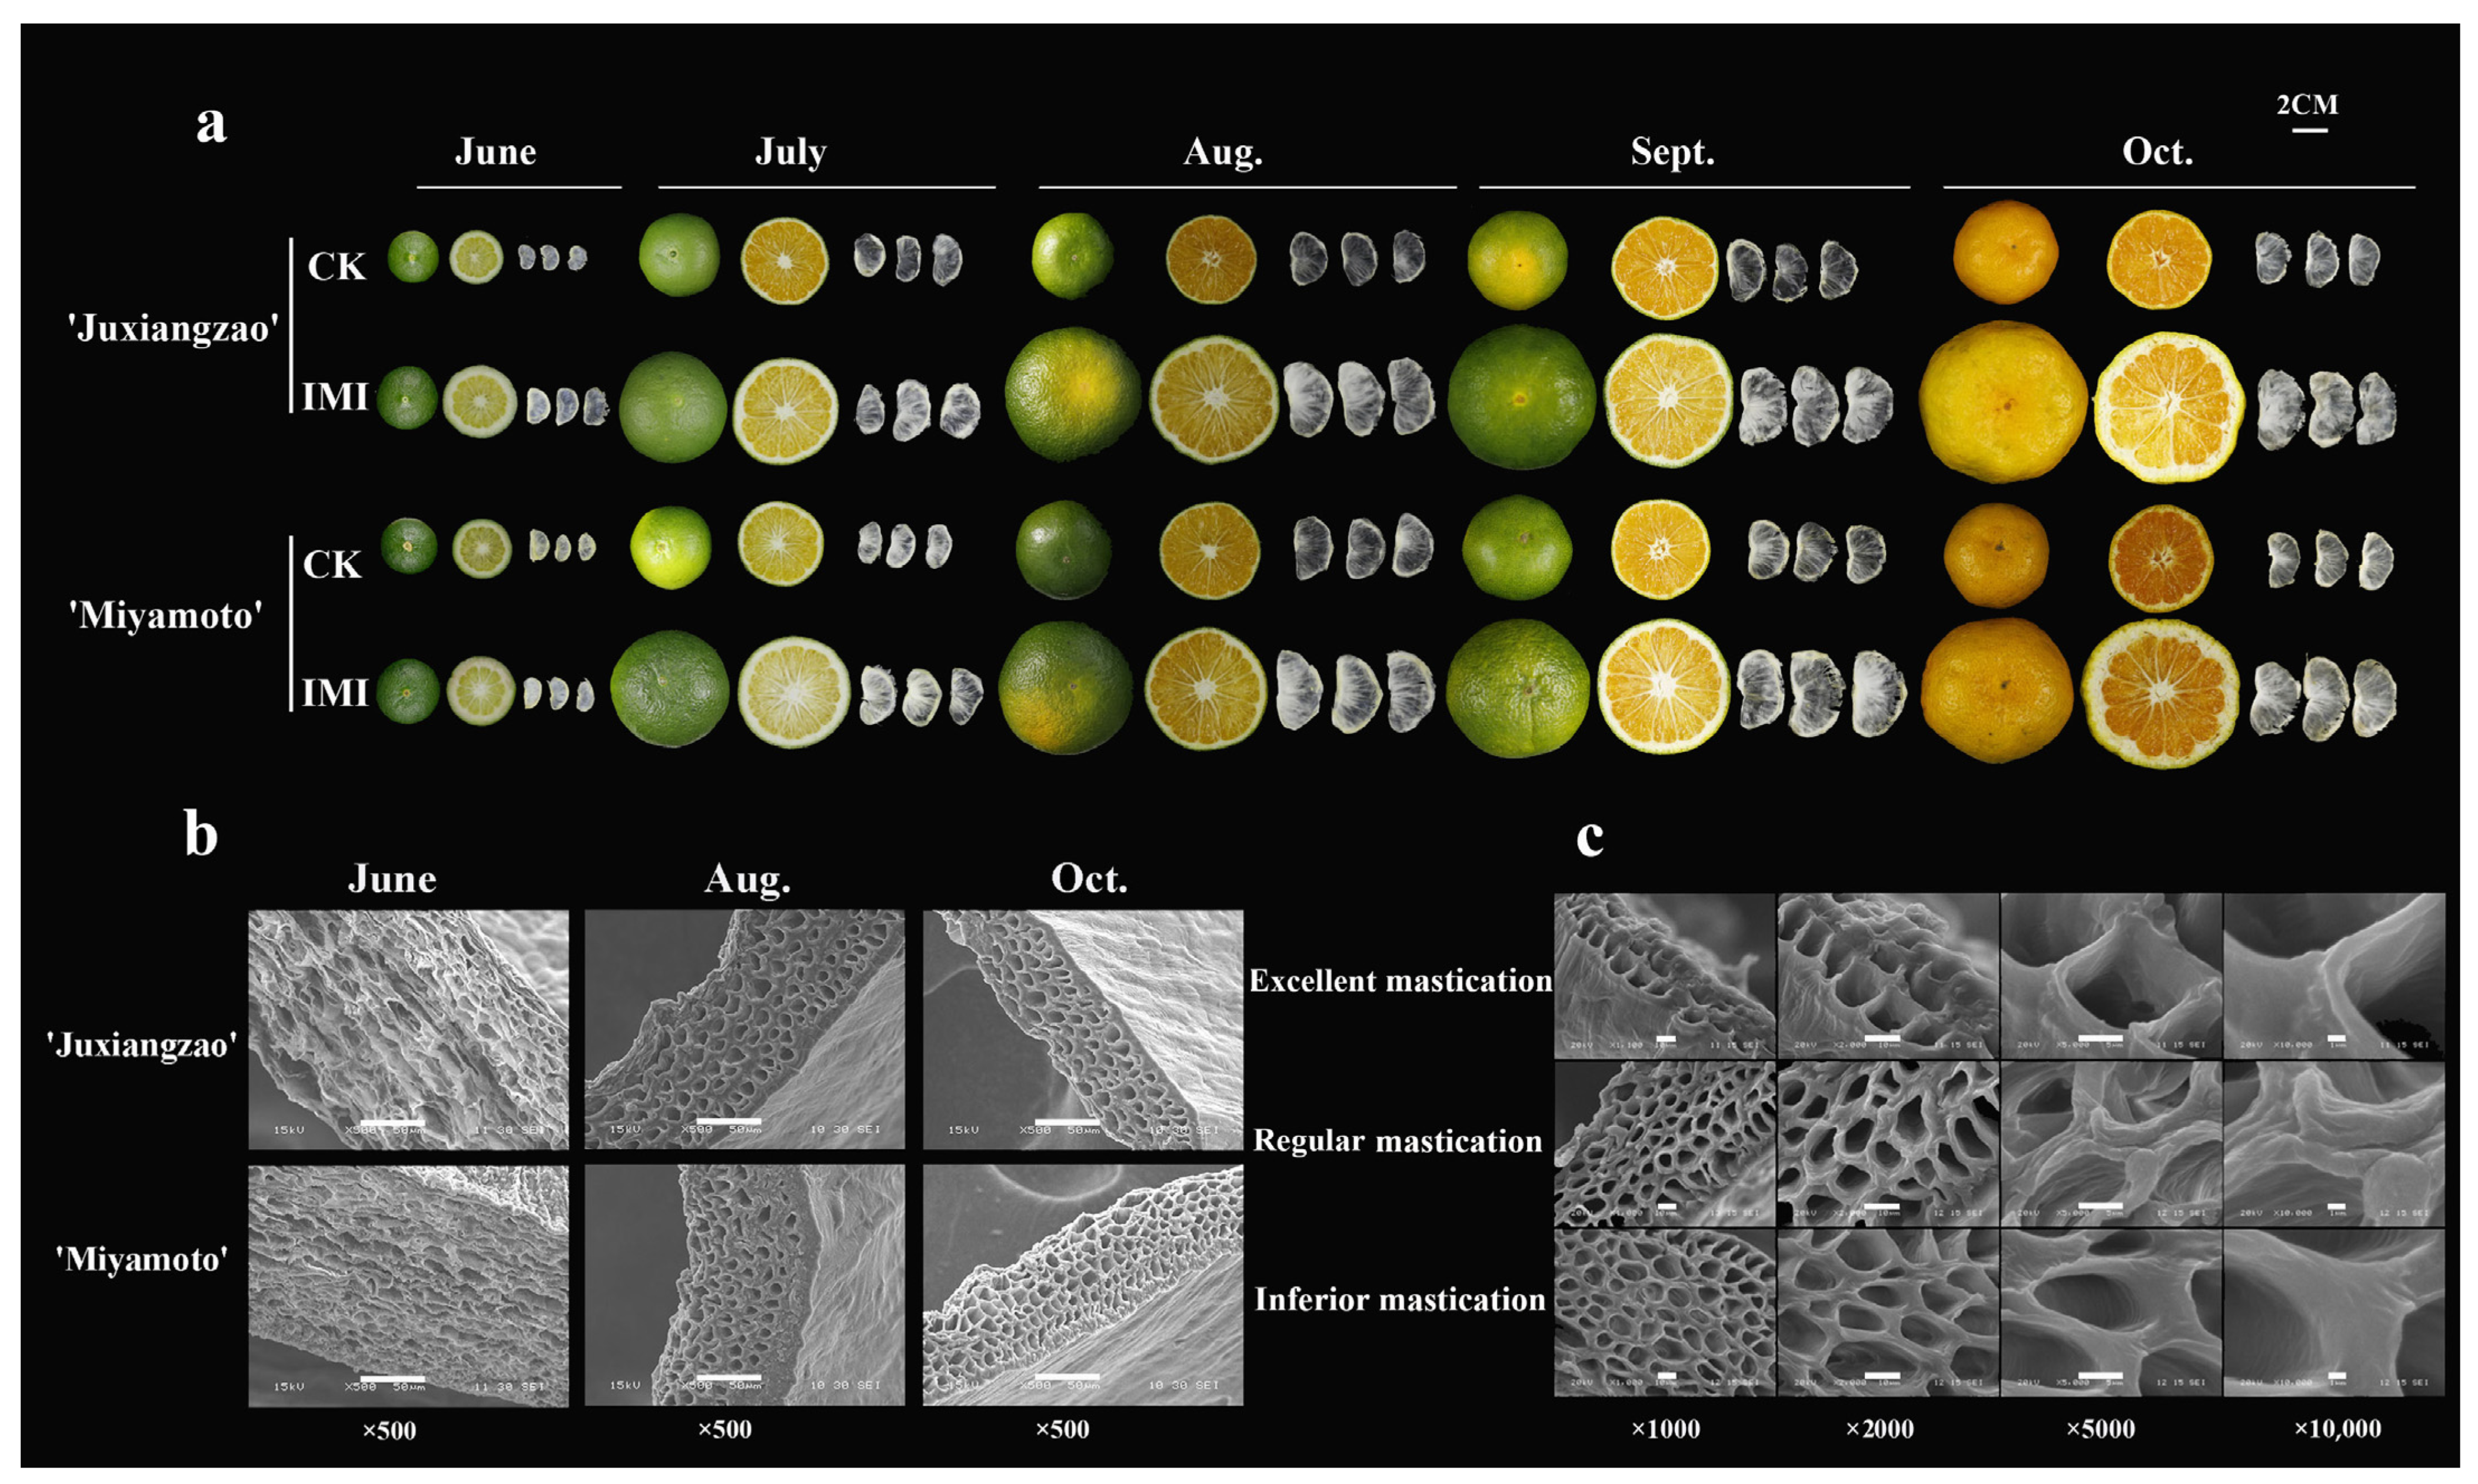 Plants Free Full Text Physiological And Ultrastructural Alterations Linked To Intrinsic Mastication Inferiority Of Segment Membranes In Satsuma Mandarin Citrus Unshiu Marc Fruits